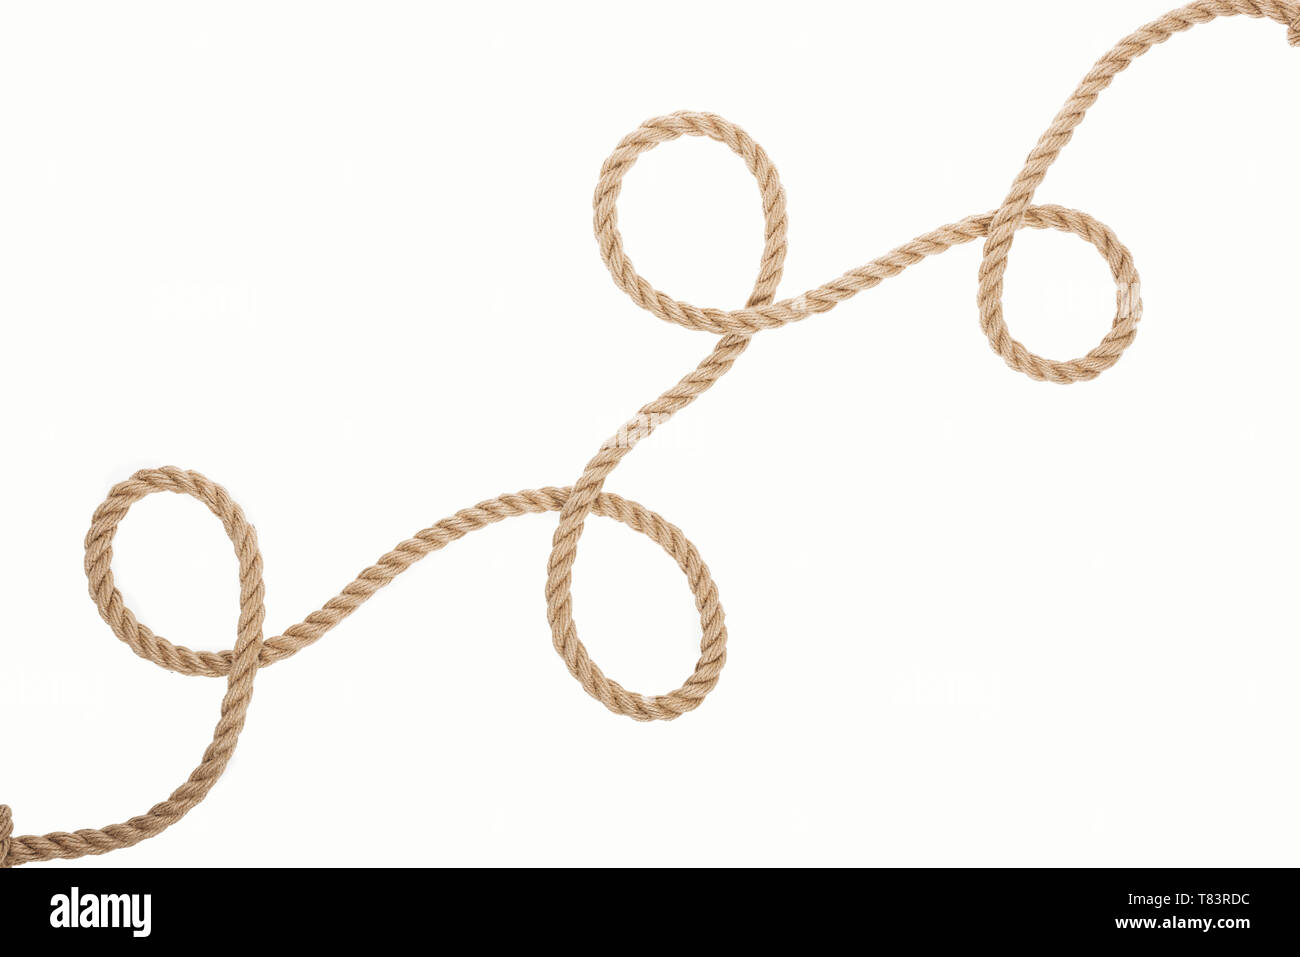 https://c8.alamy.com/comp/T83RDC/long-brown-and-jute-rope-with-curls-isolated-on-white-T83RDC.jpg